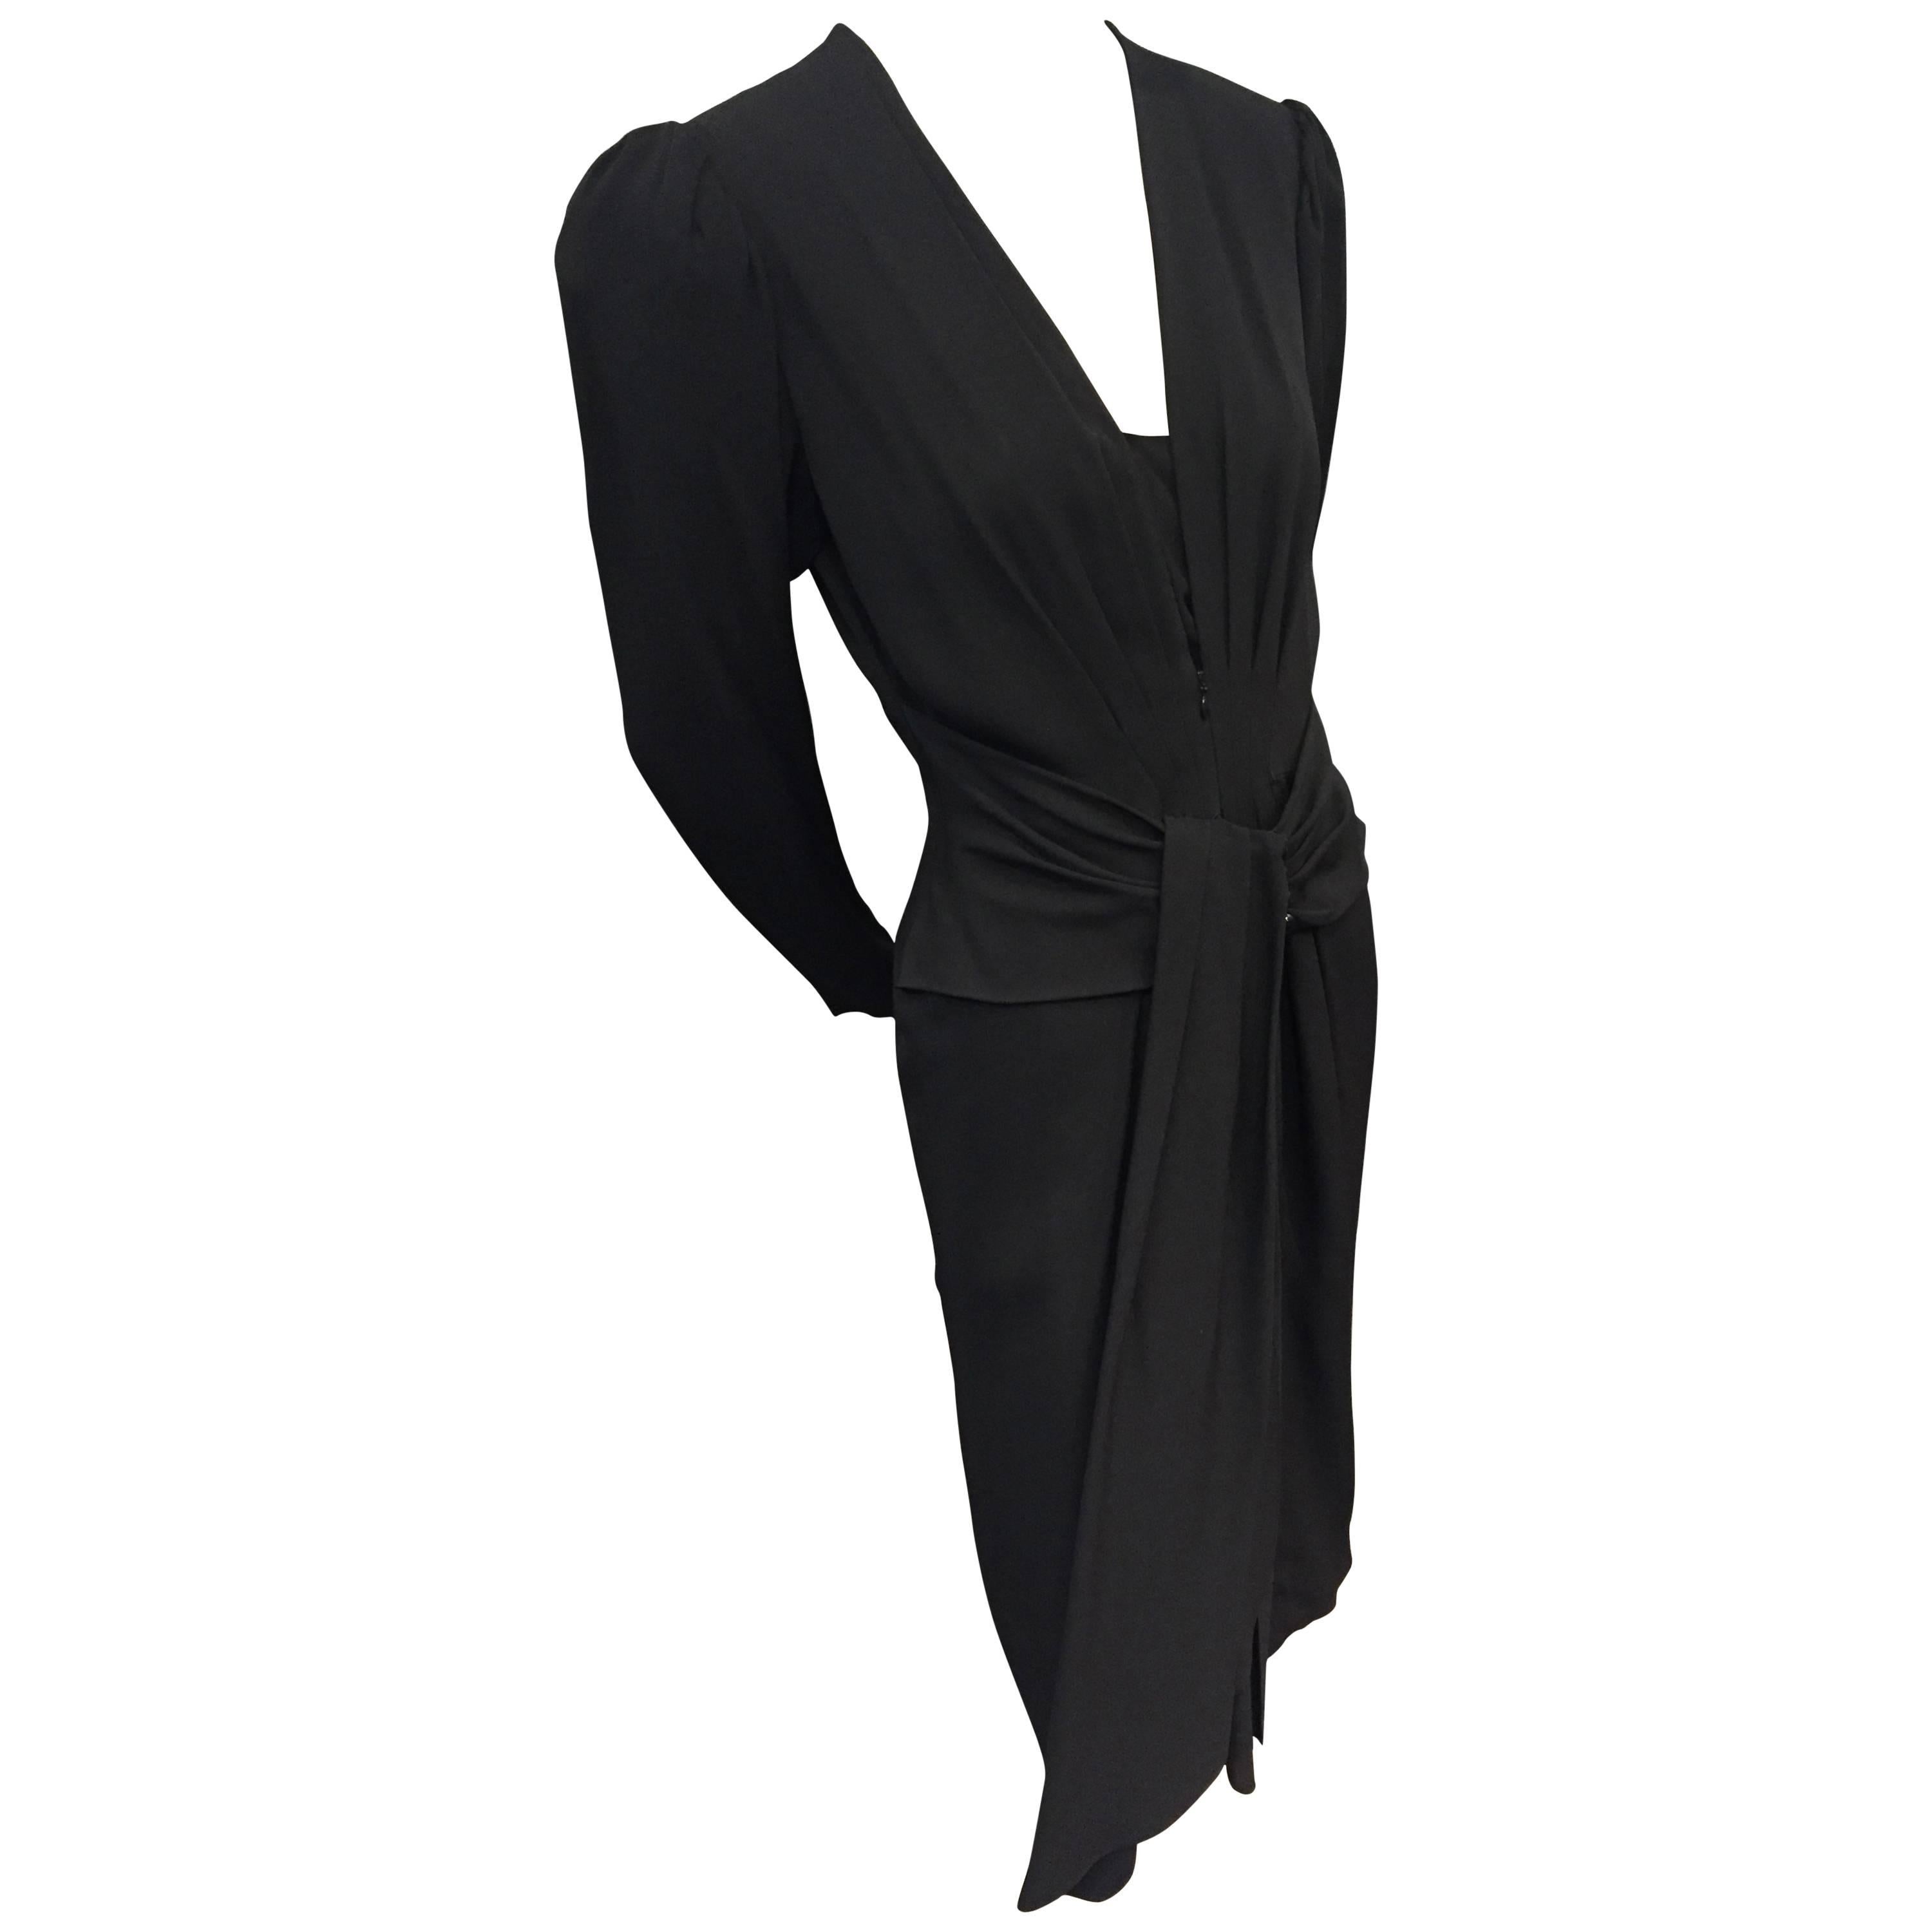 1980s Ted Lapidus Black Crepe Cocktail Dress w/ 1940s-Inspired Style